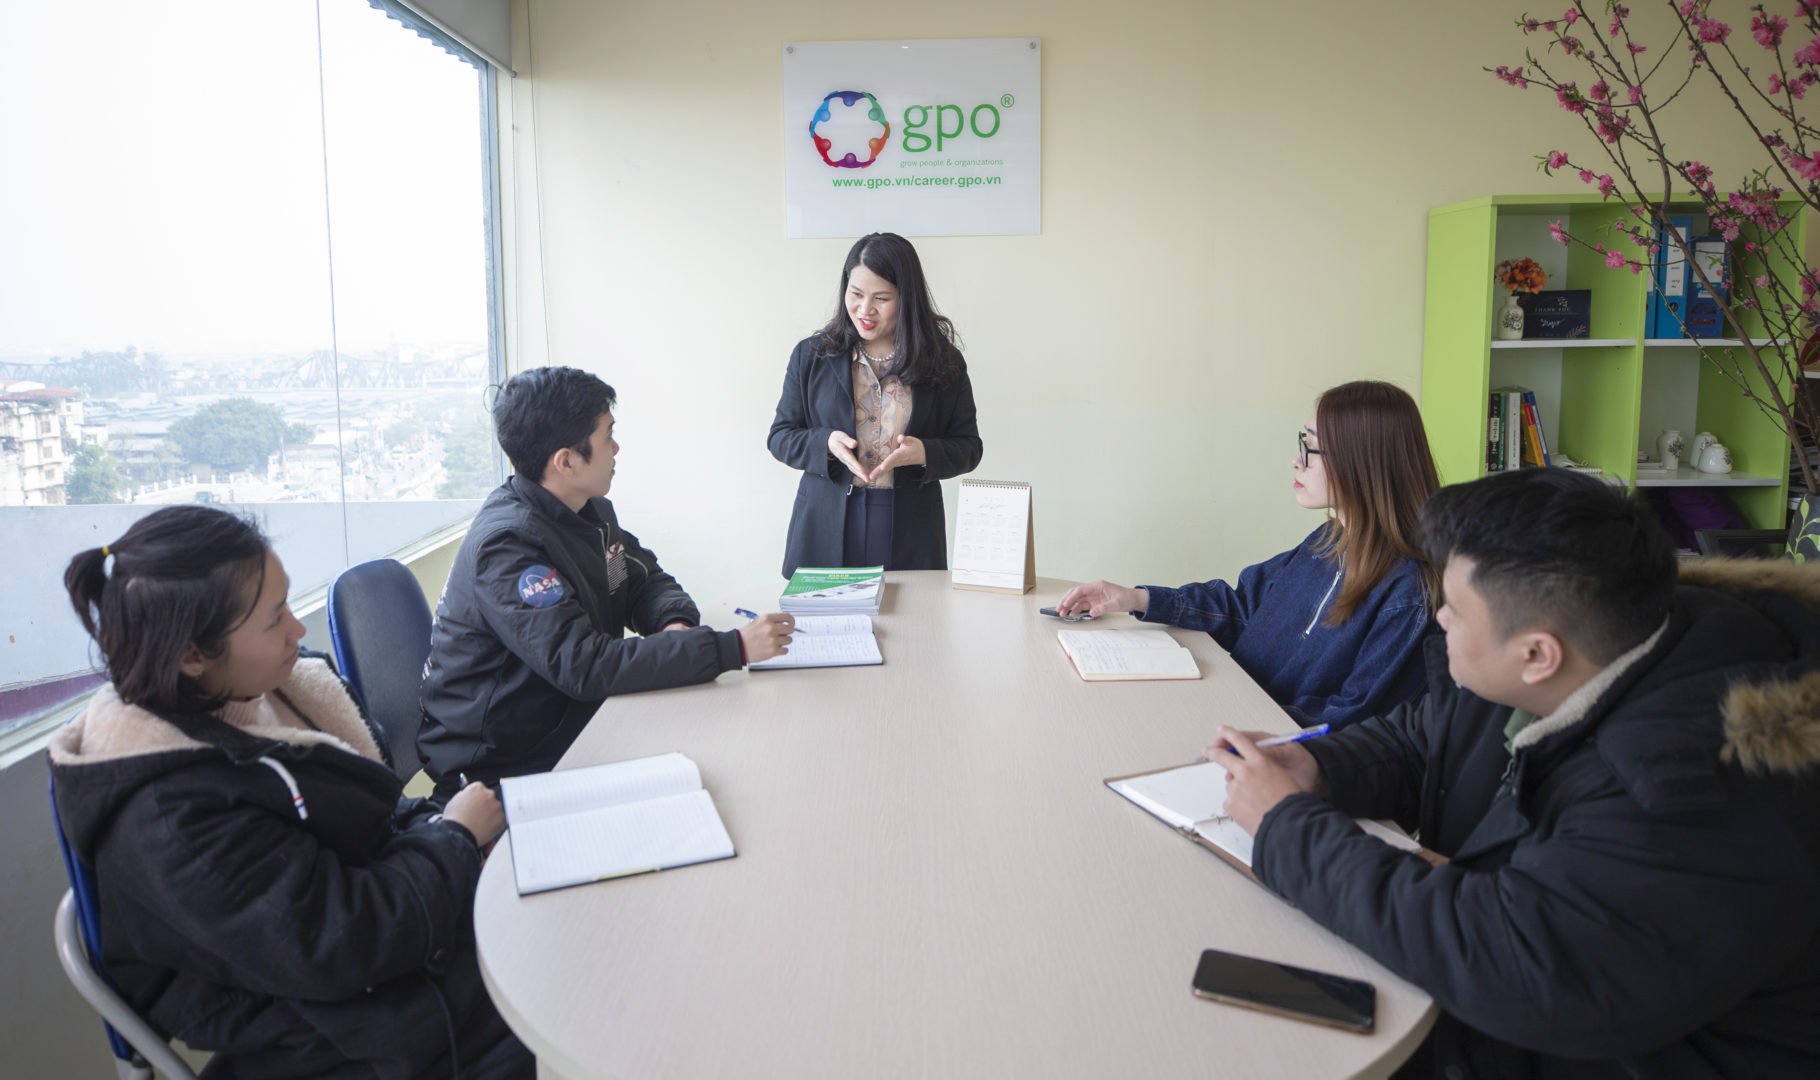 Yen Do, WEAVE participant in Vietnam, leads a meeting with her staff